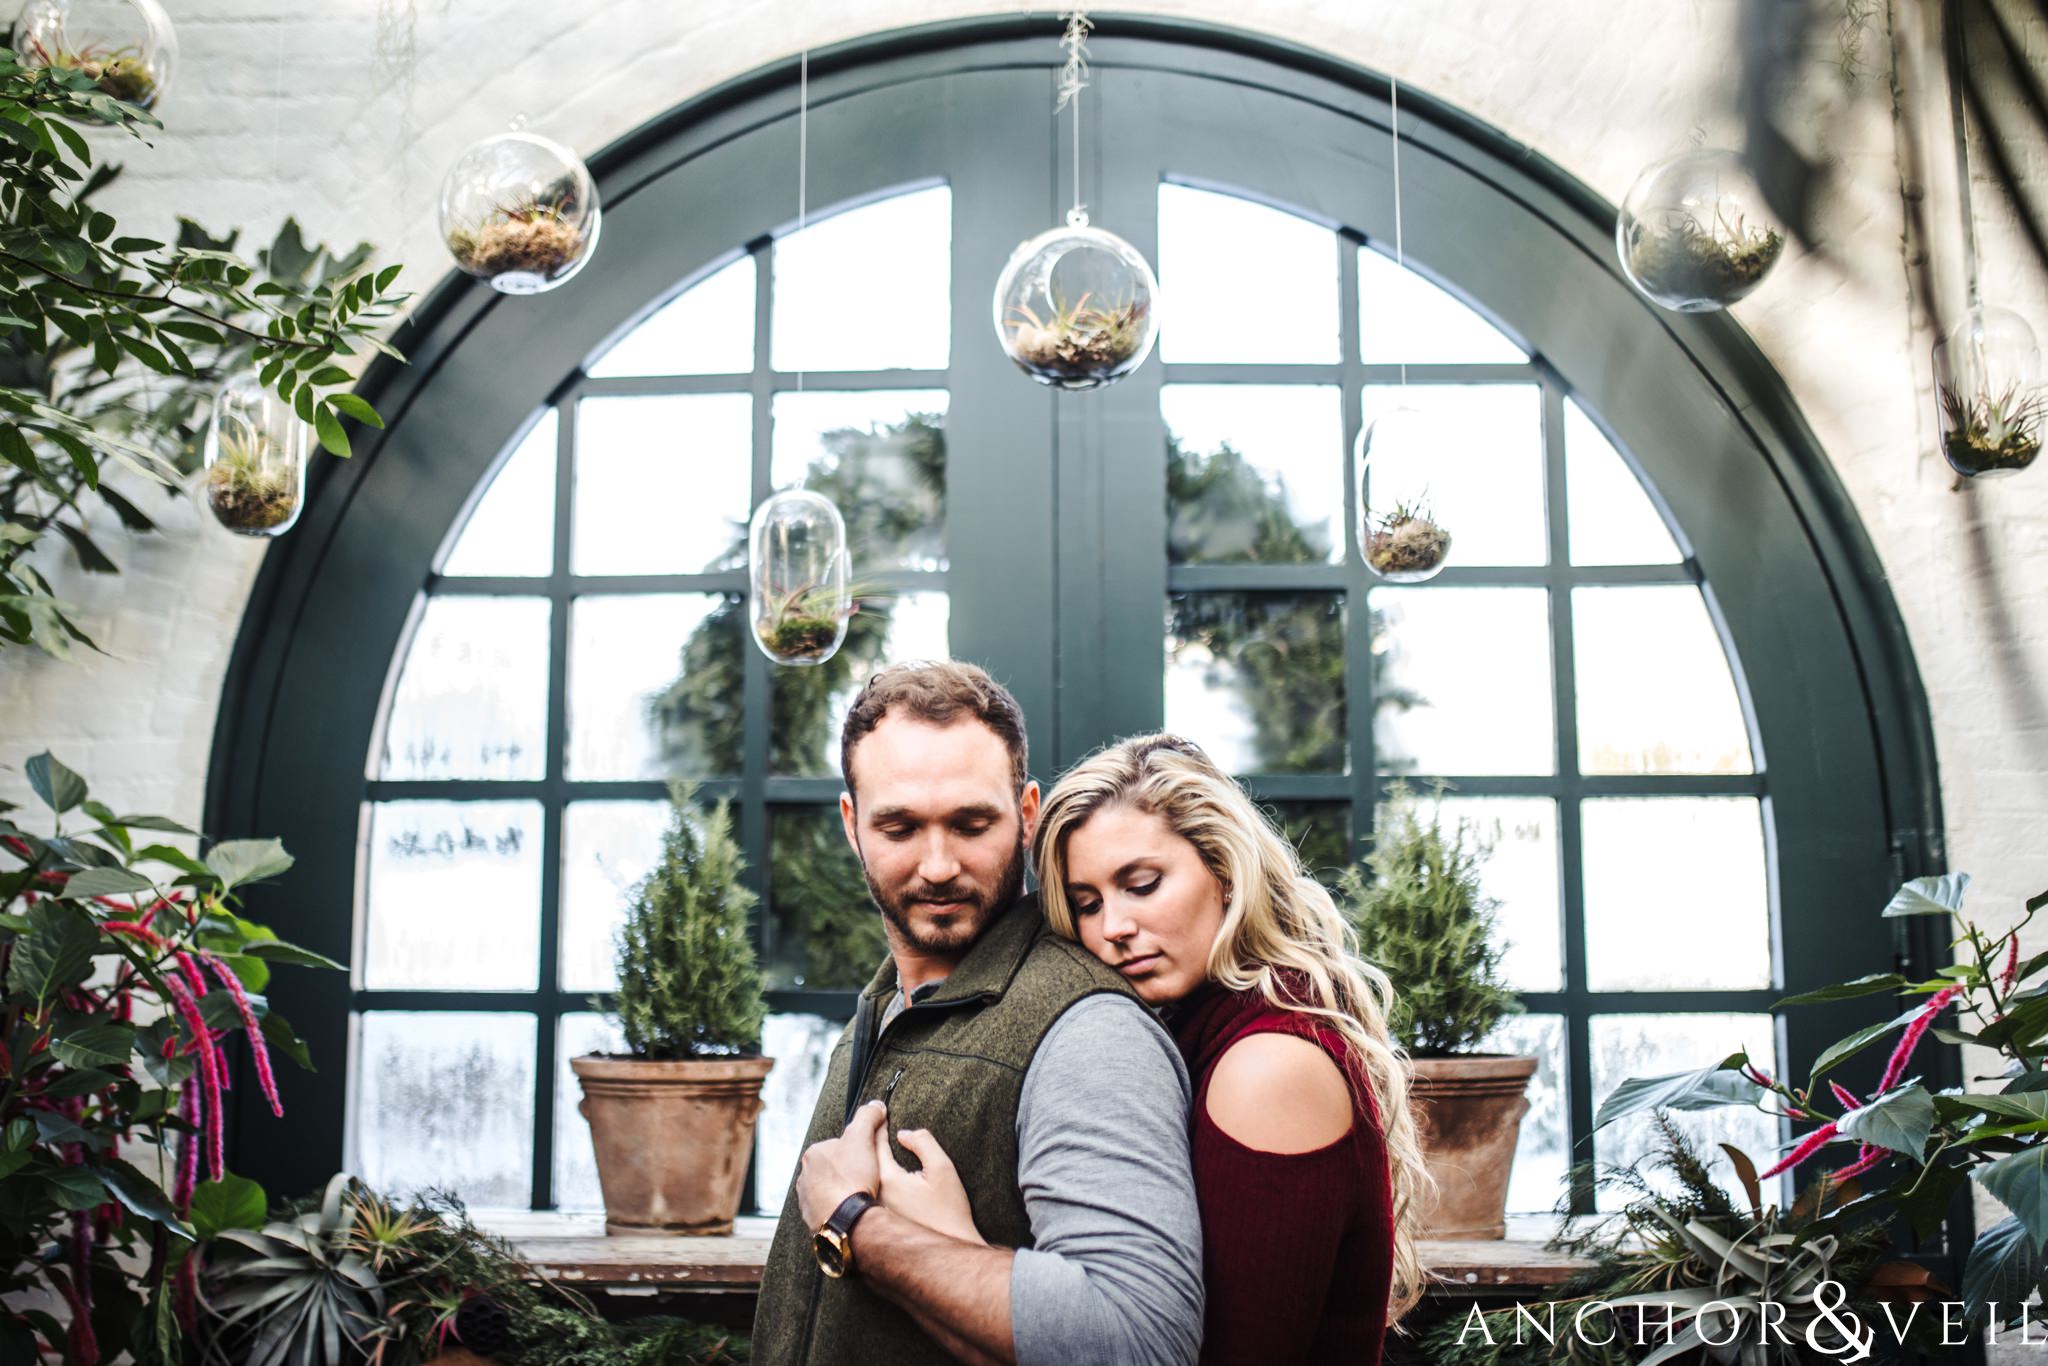 holding under the terrariums during their Snowy Biltmore Engagement Session